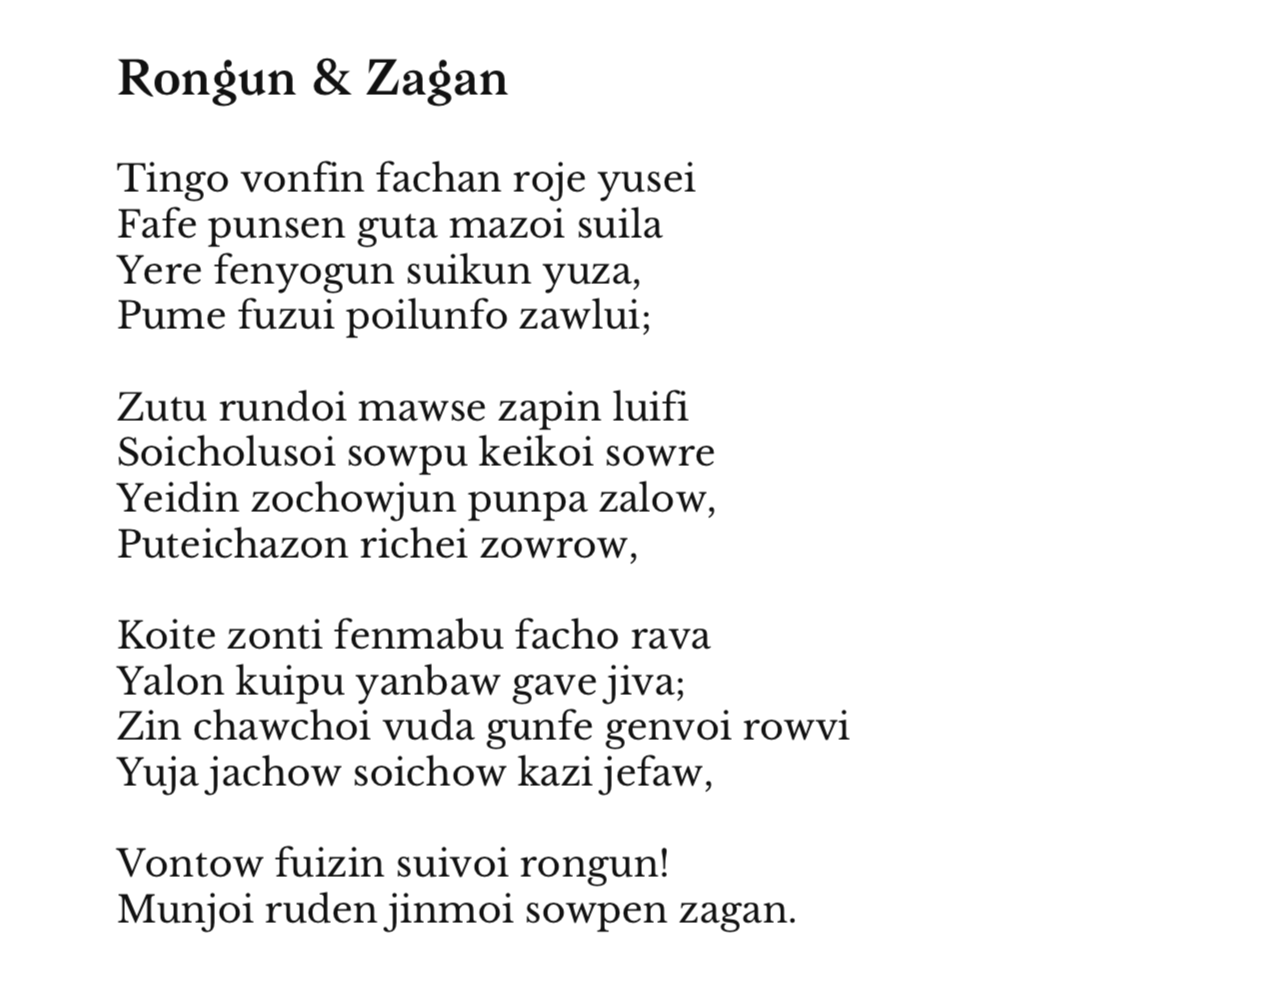 Example of a generated sonnet rhyming ‘rongun’ and ‘zagan’